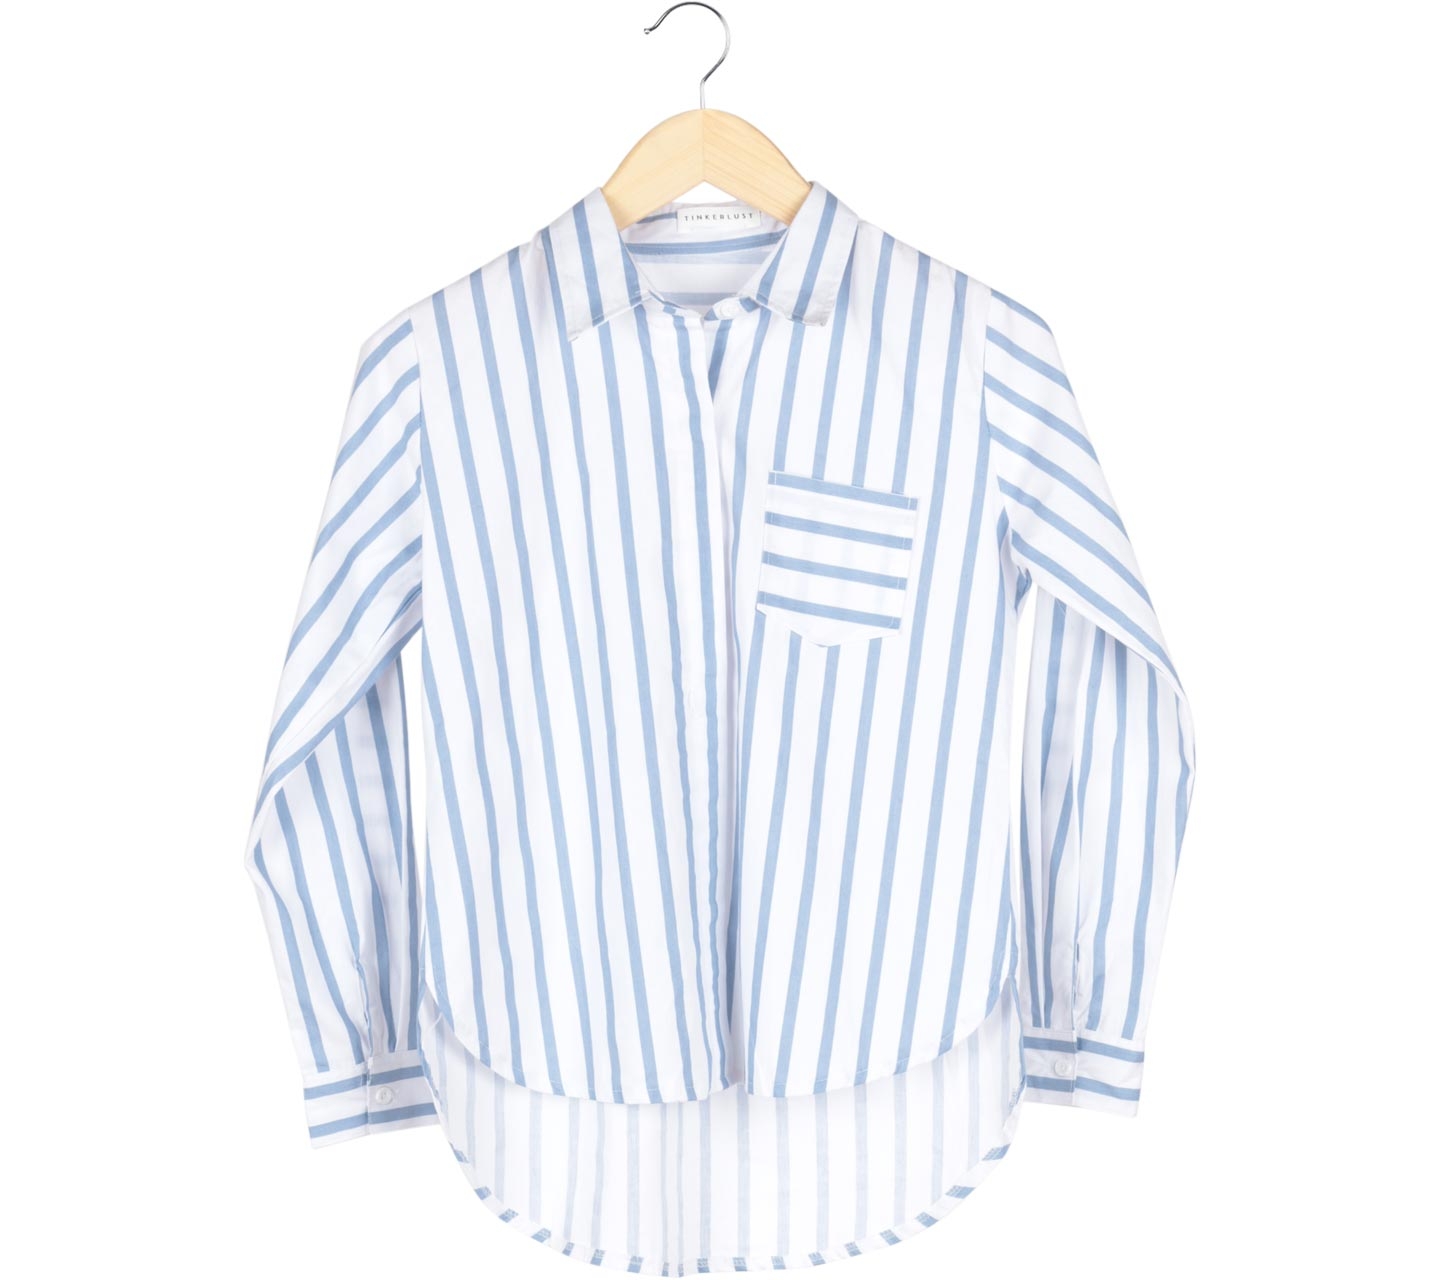 Tinkerlust White With Blue Stripes Shirt